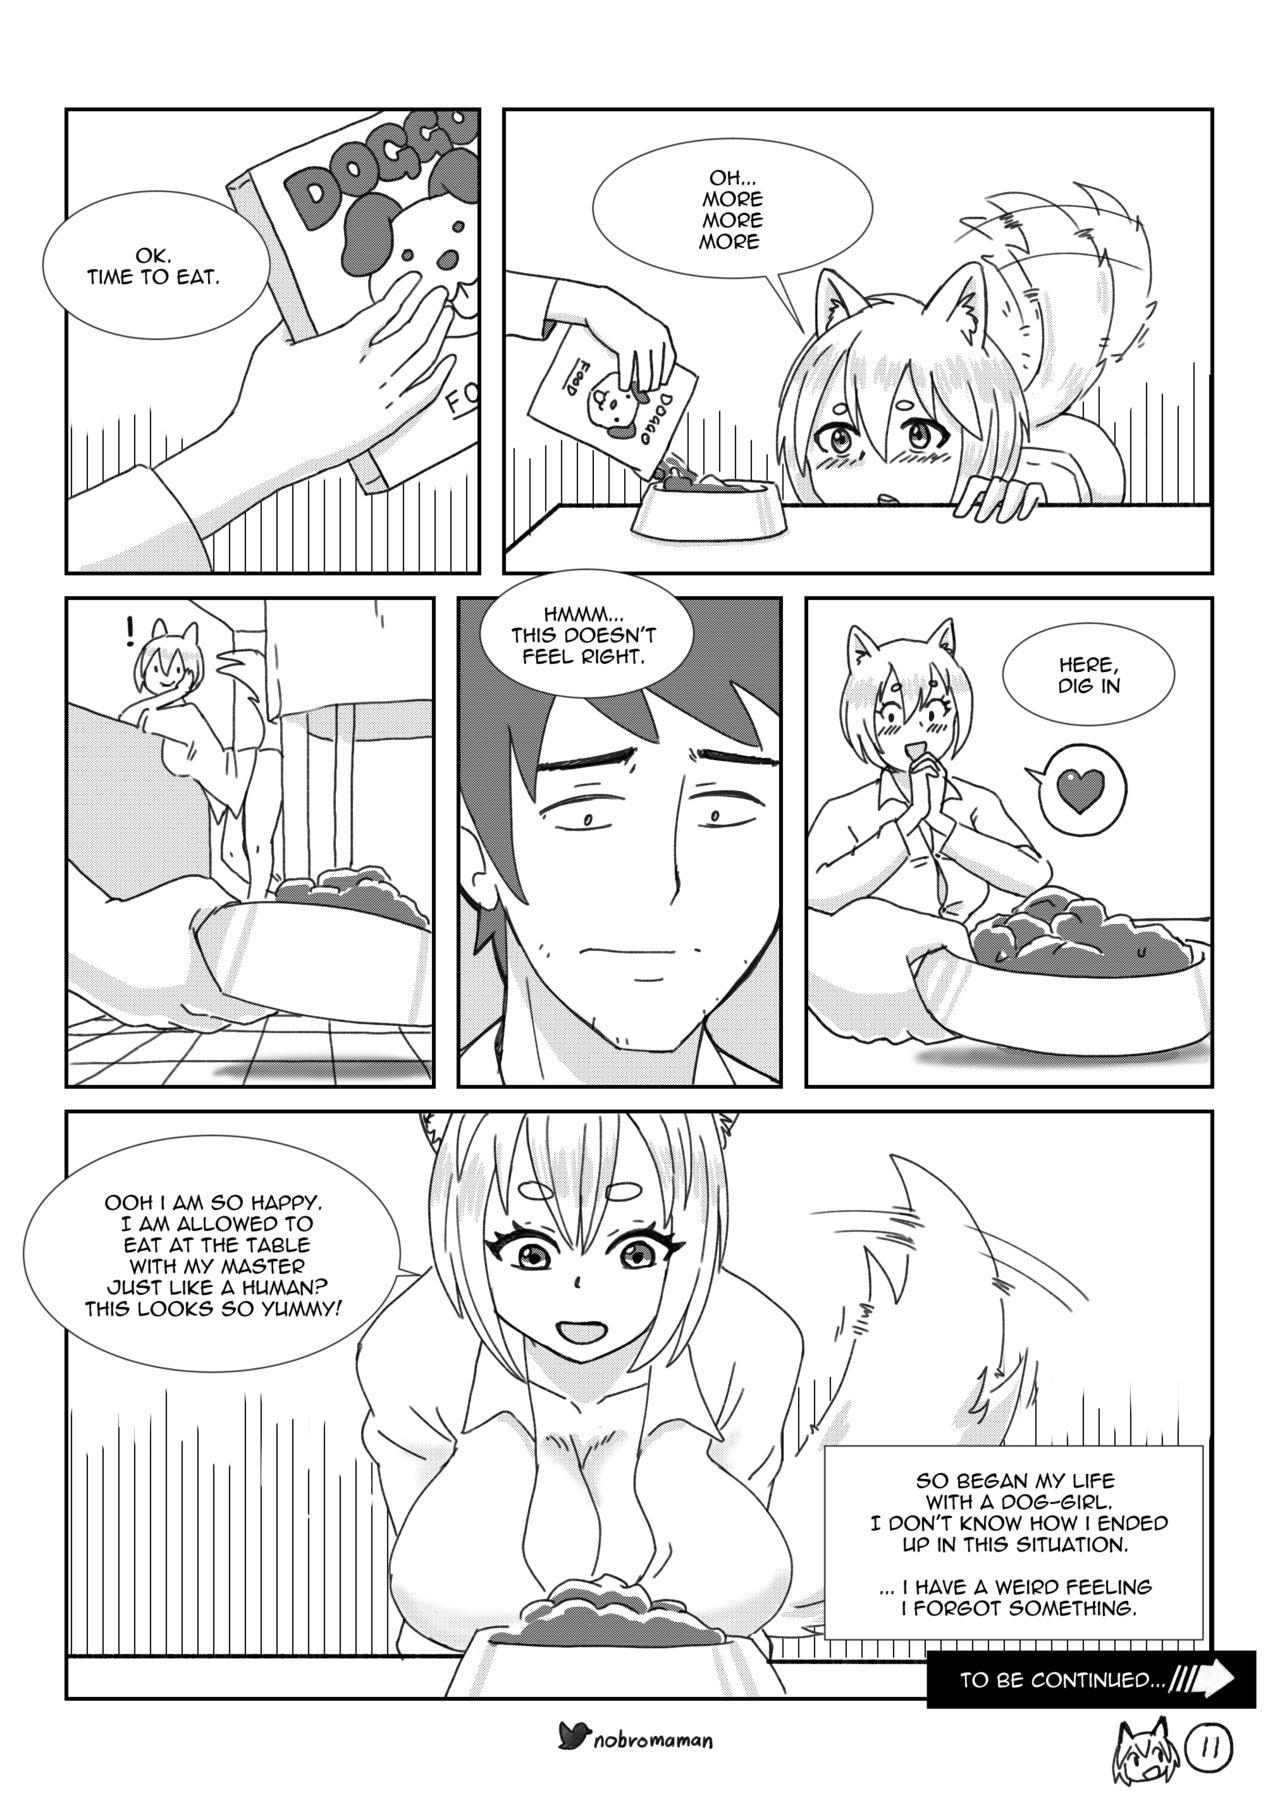 Life with a dog girl - Chapter1 11